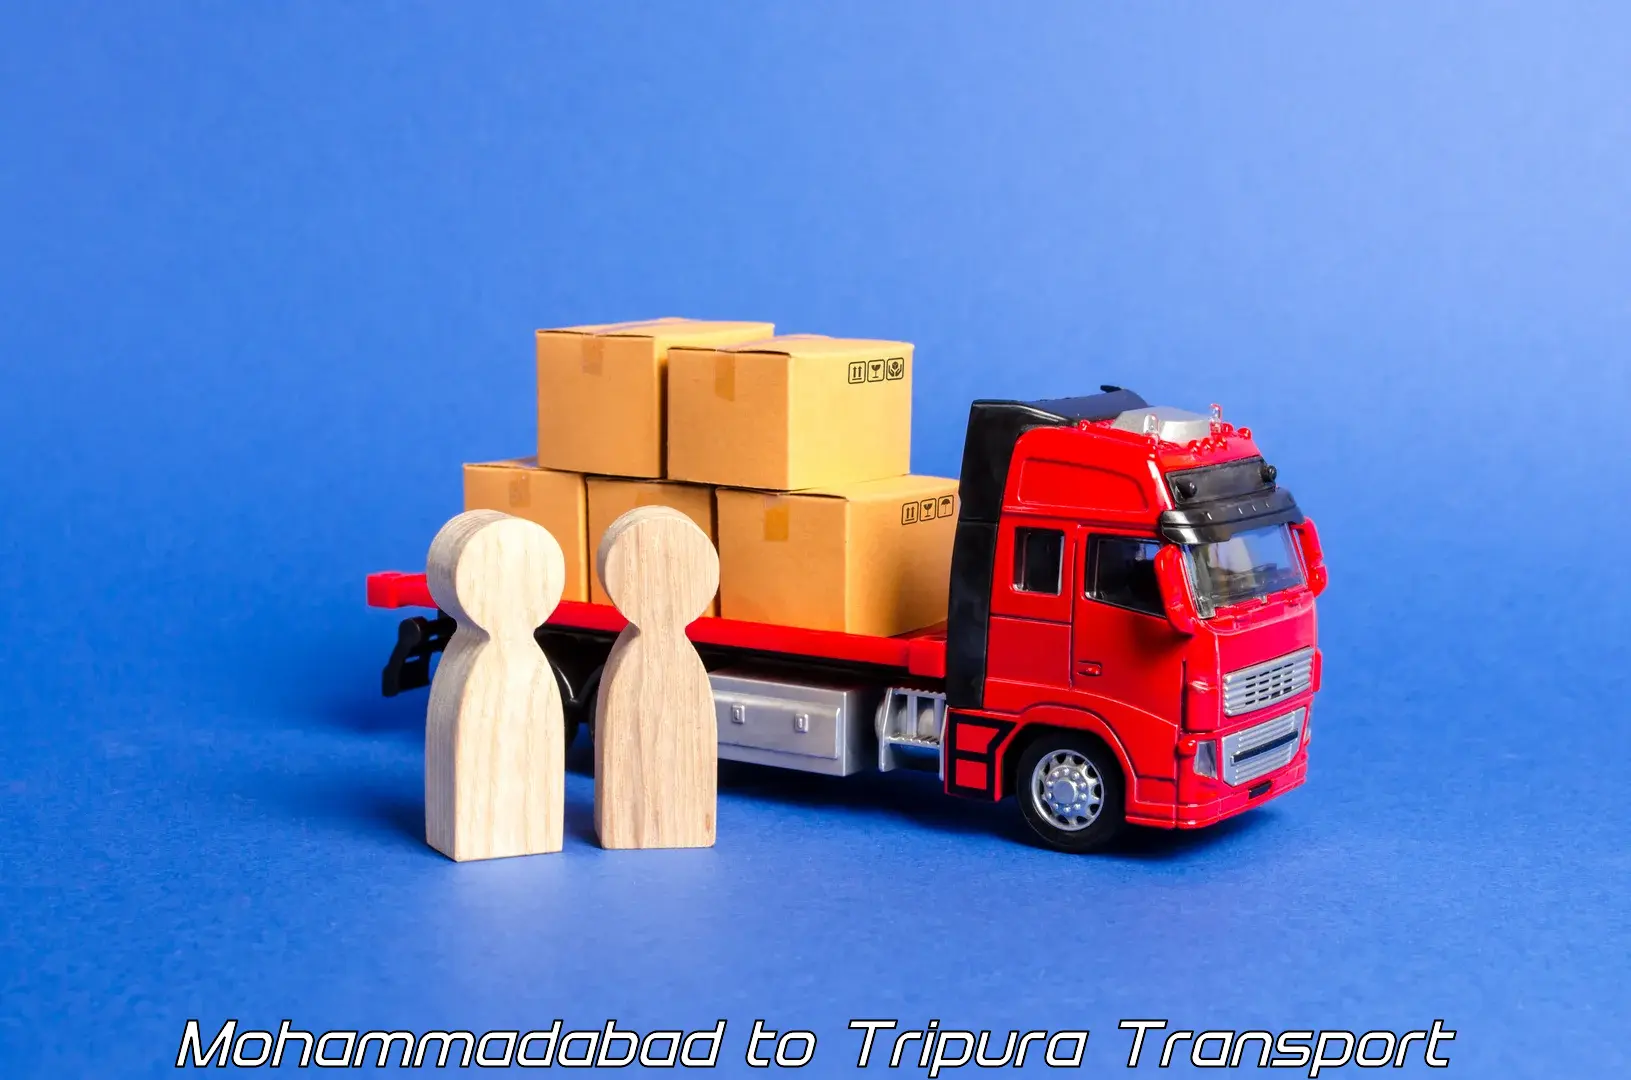 Express transport services in Mohammadabad to Udaipur Tripura